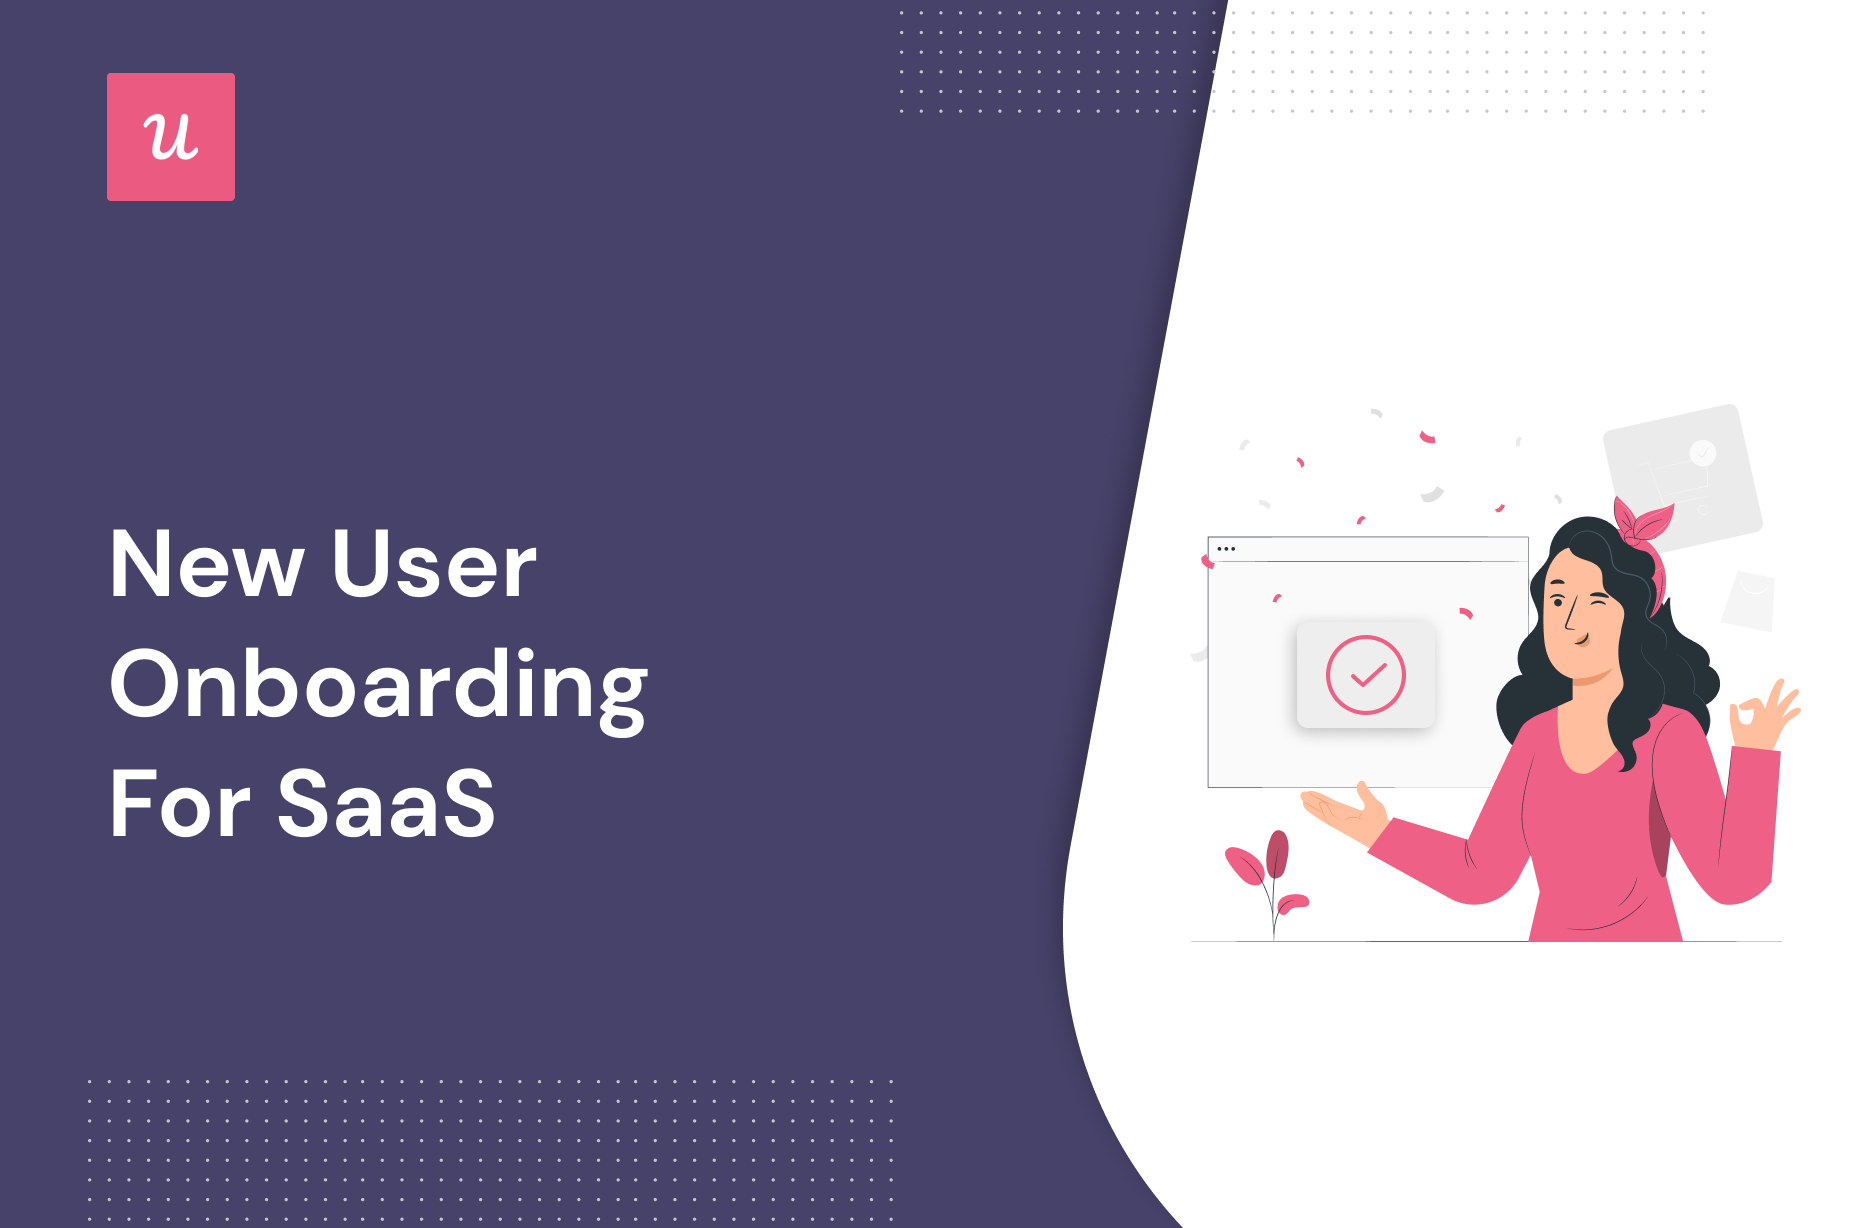 New User Onboarding for SaaS